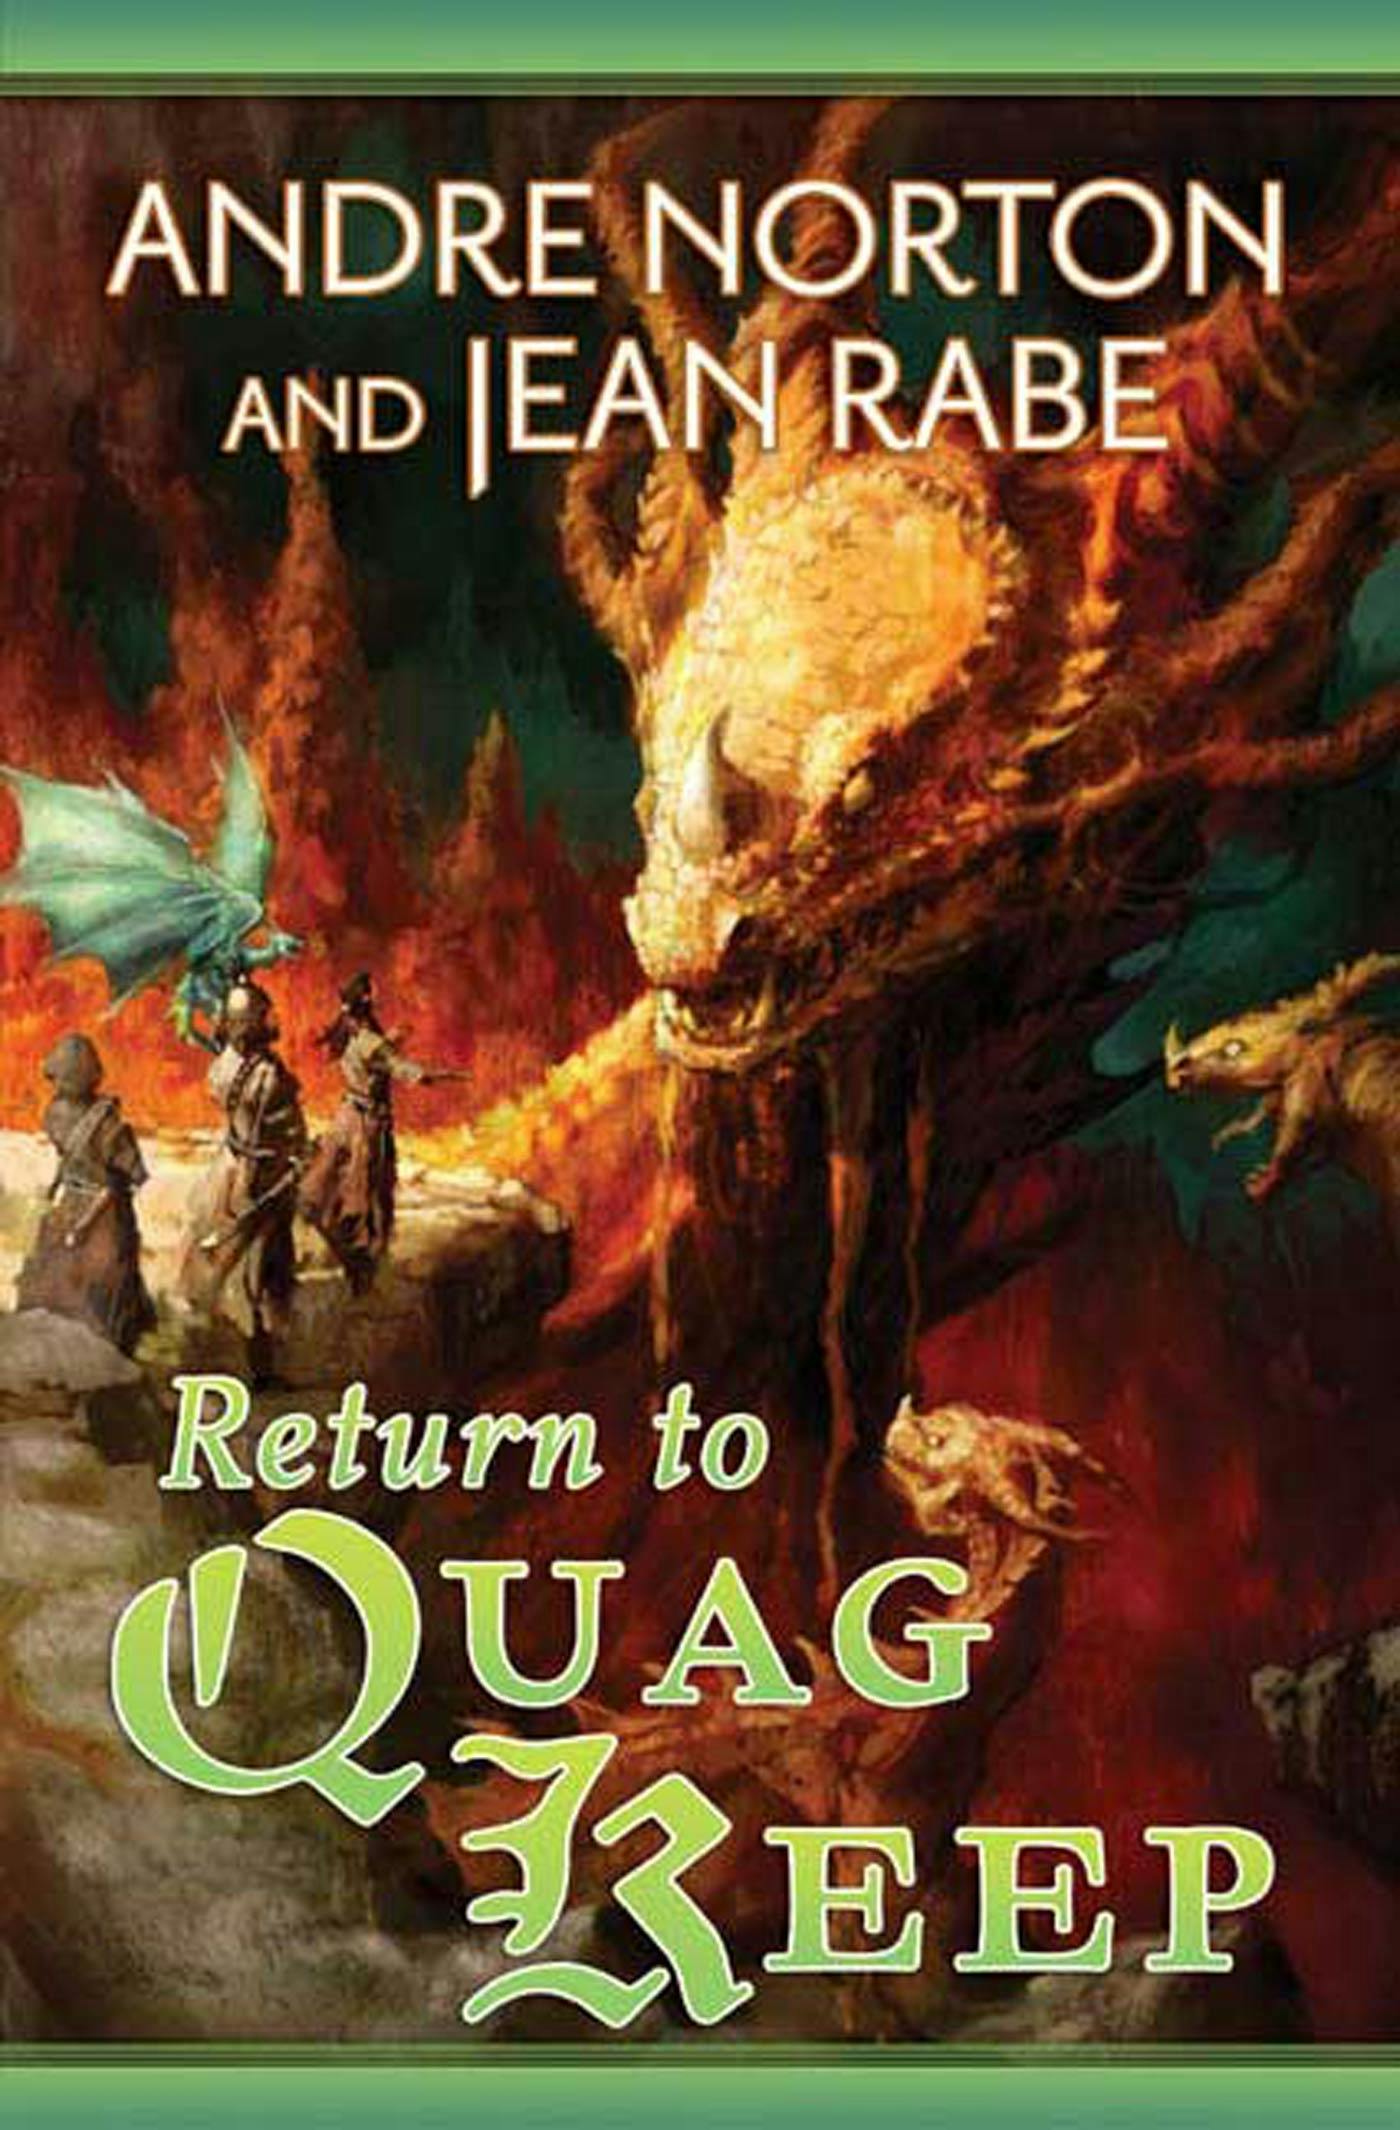 Cover for the book titled as: Return to Quag Keep